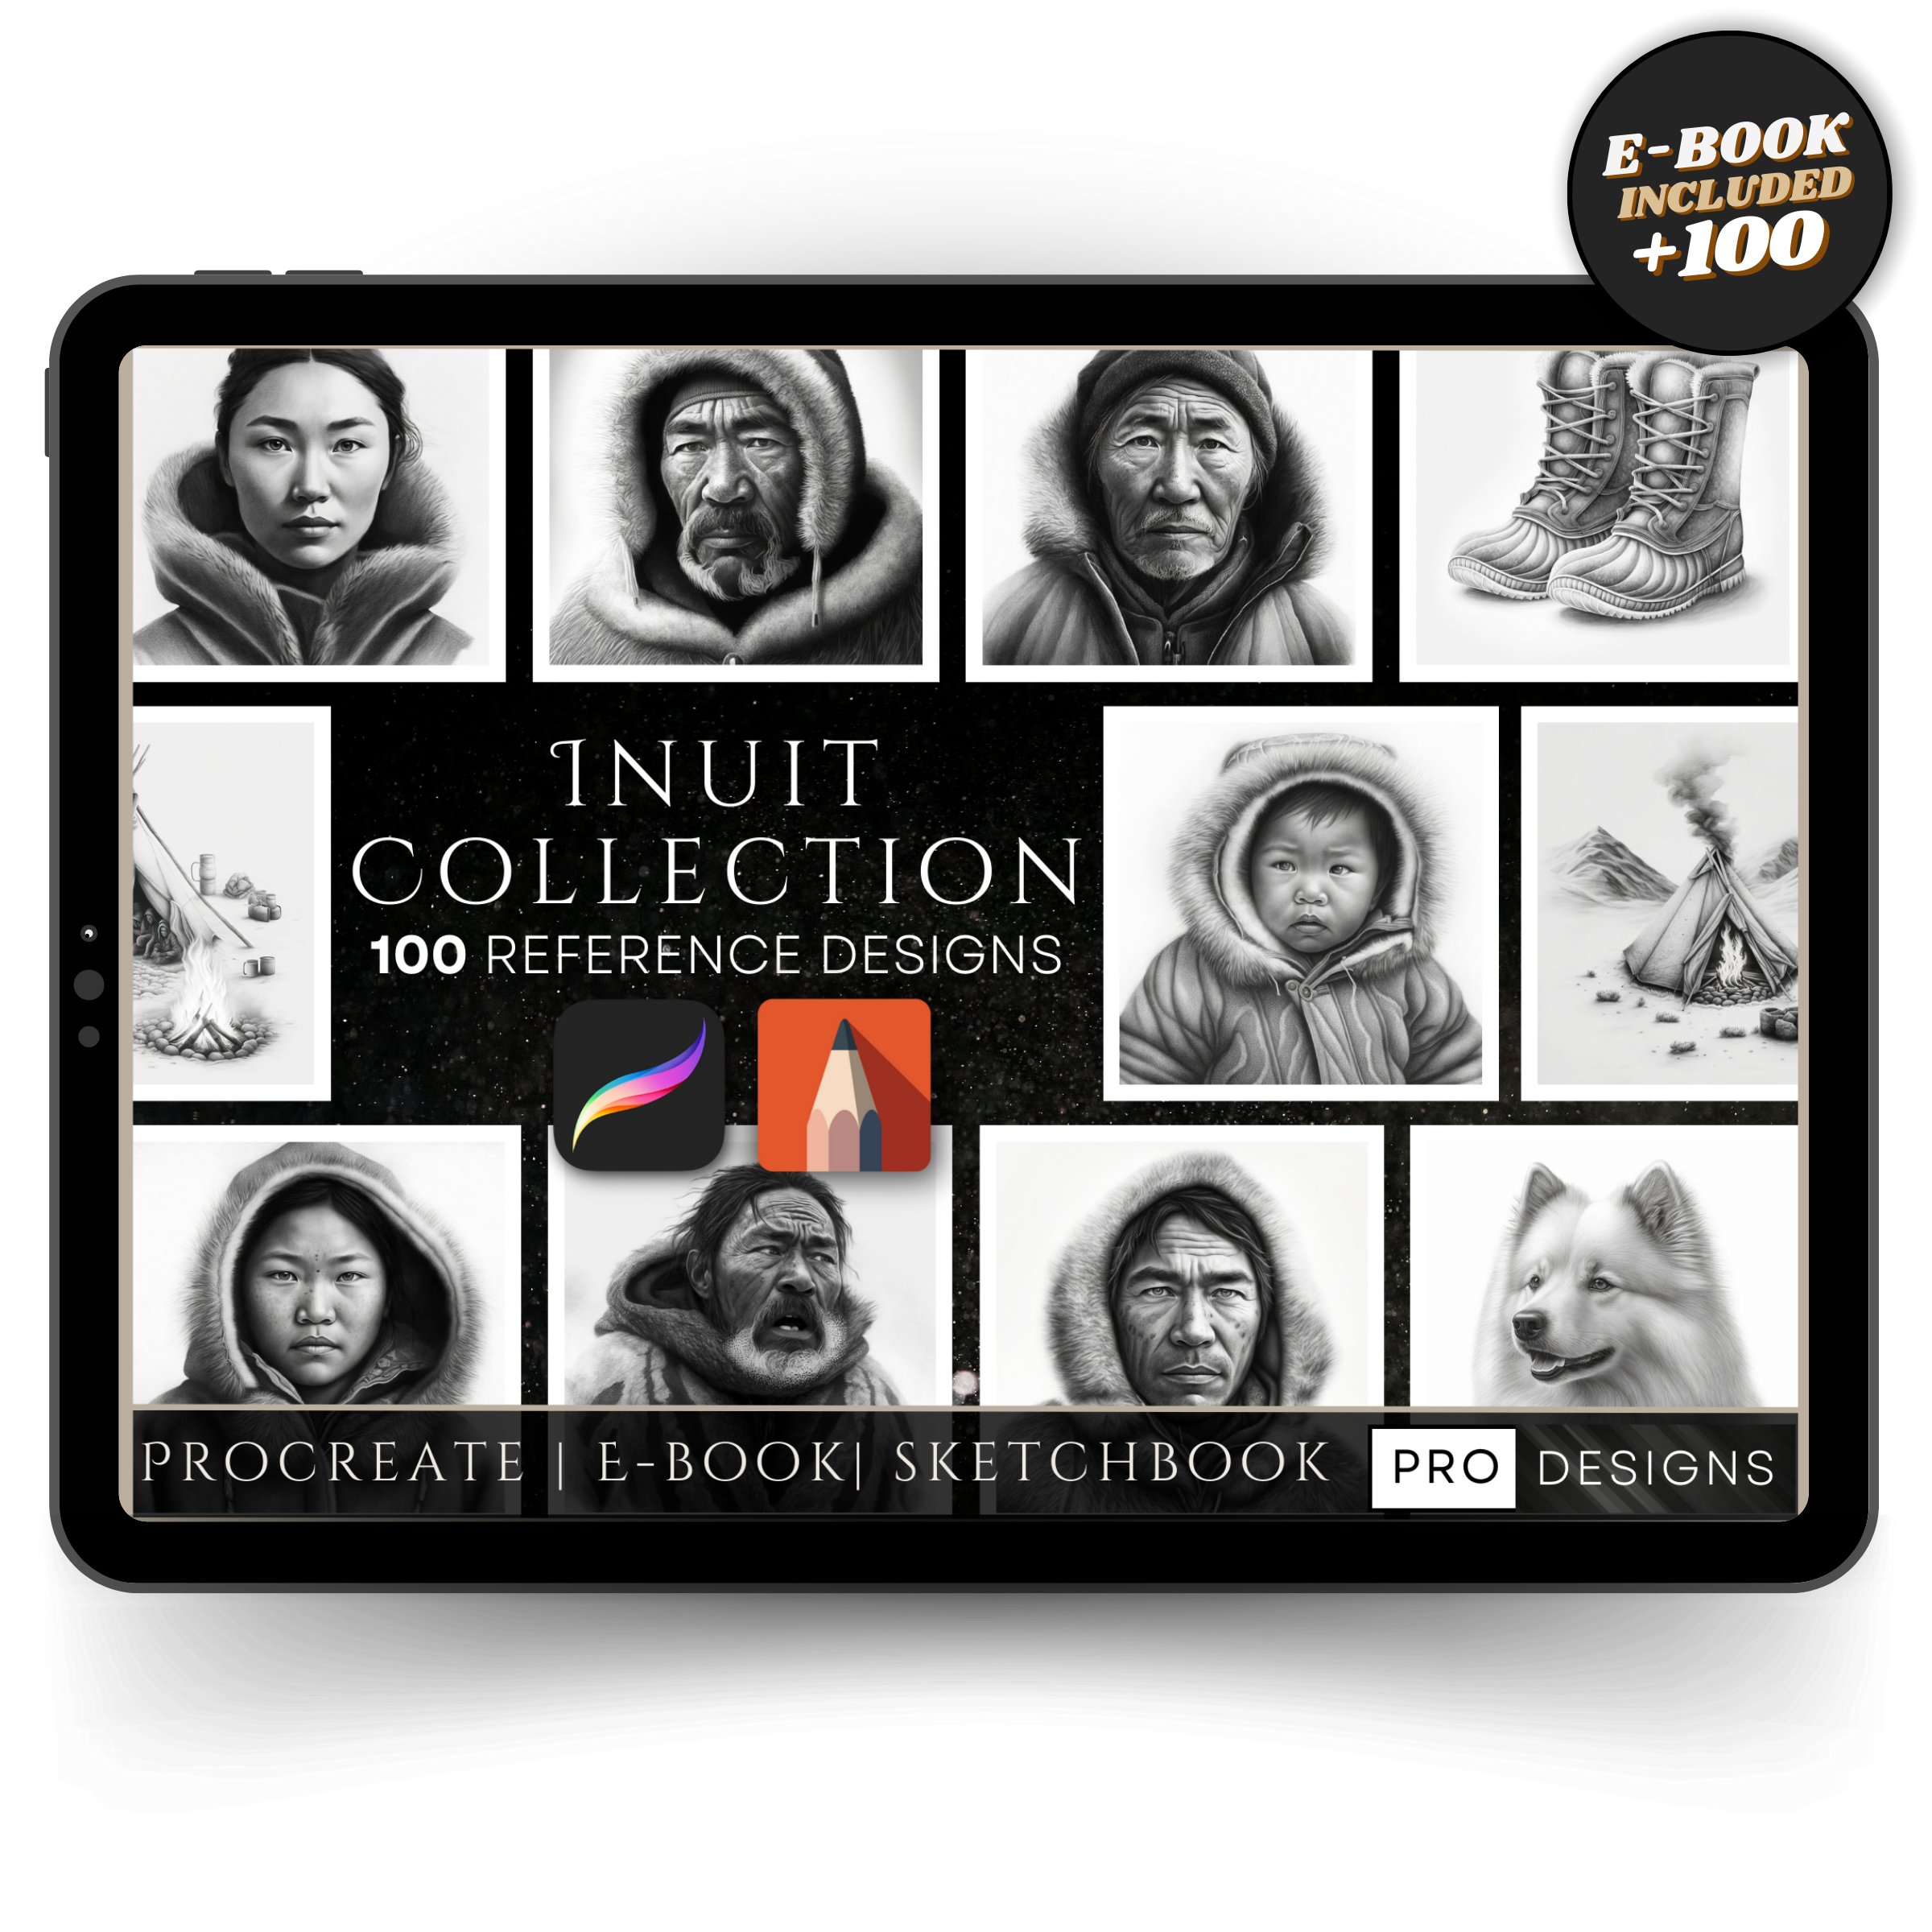 "Arctic Essence" - The Inuit Collection